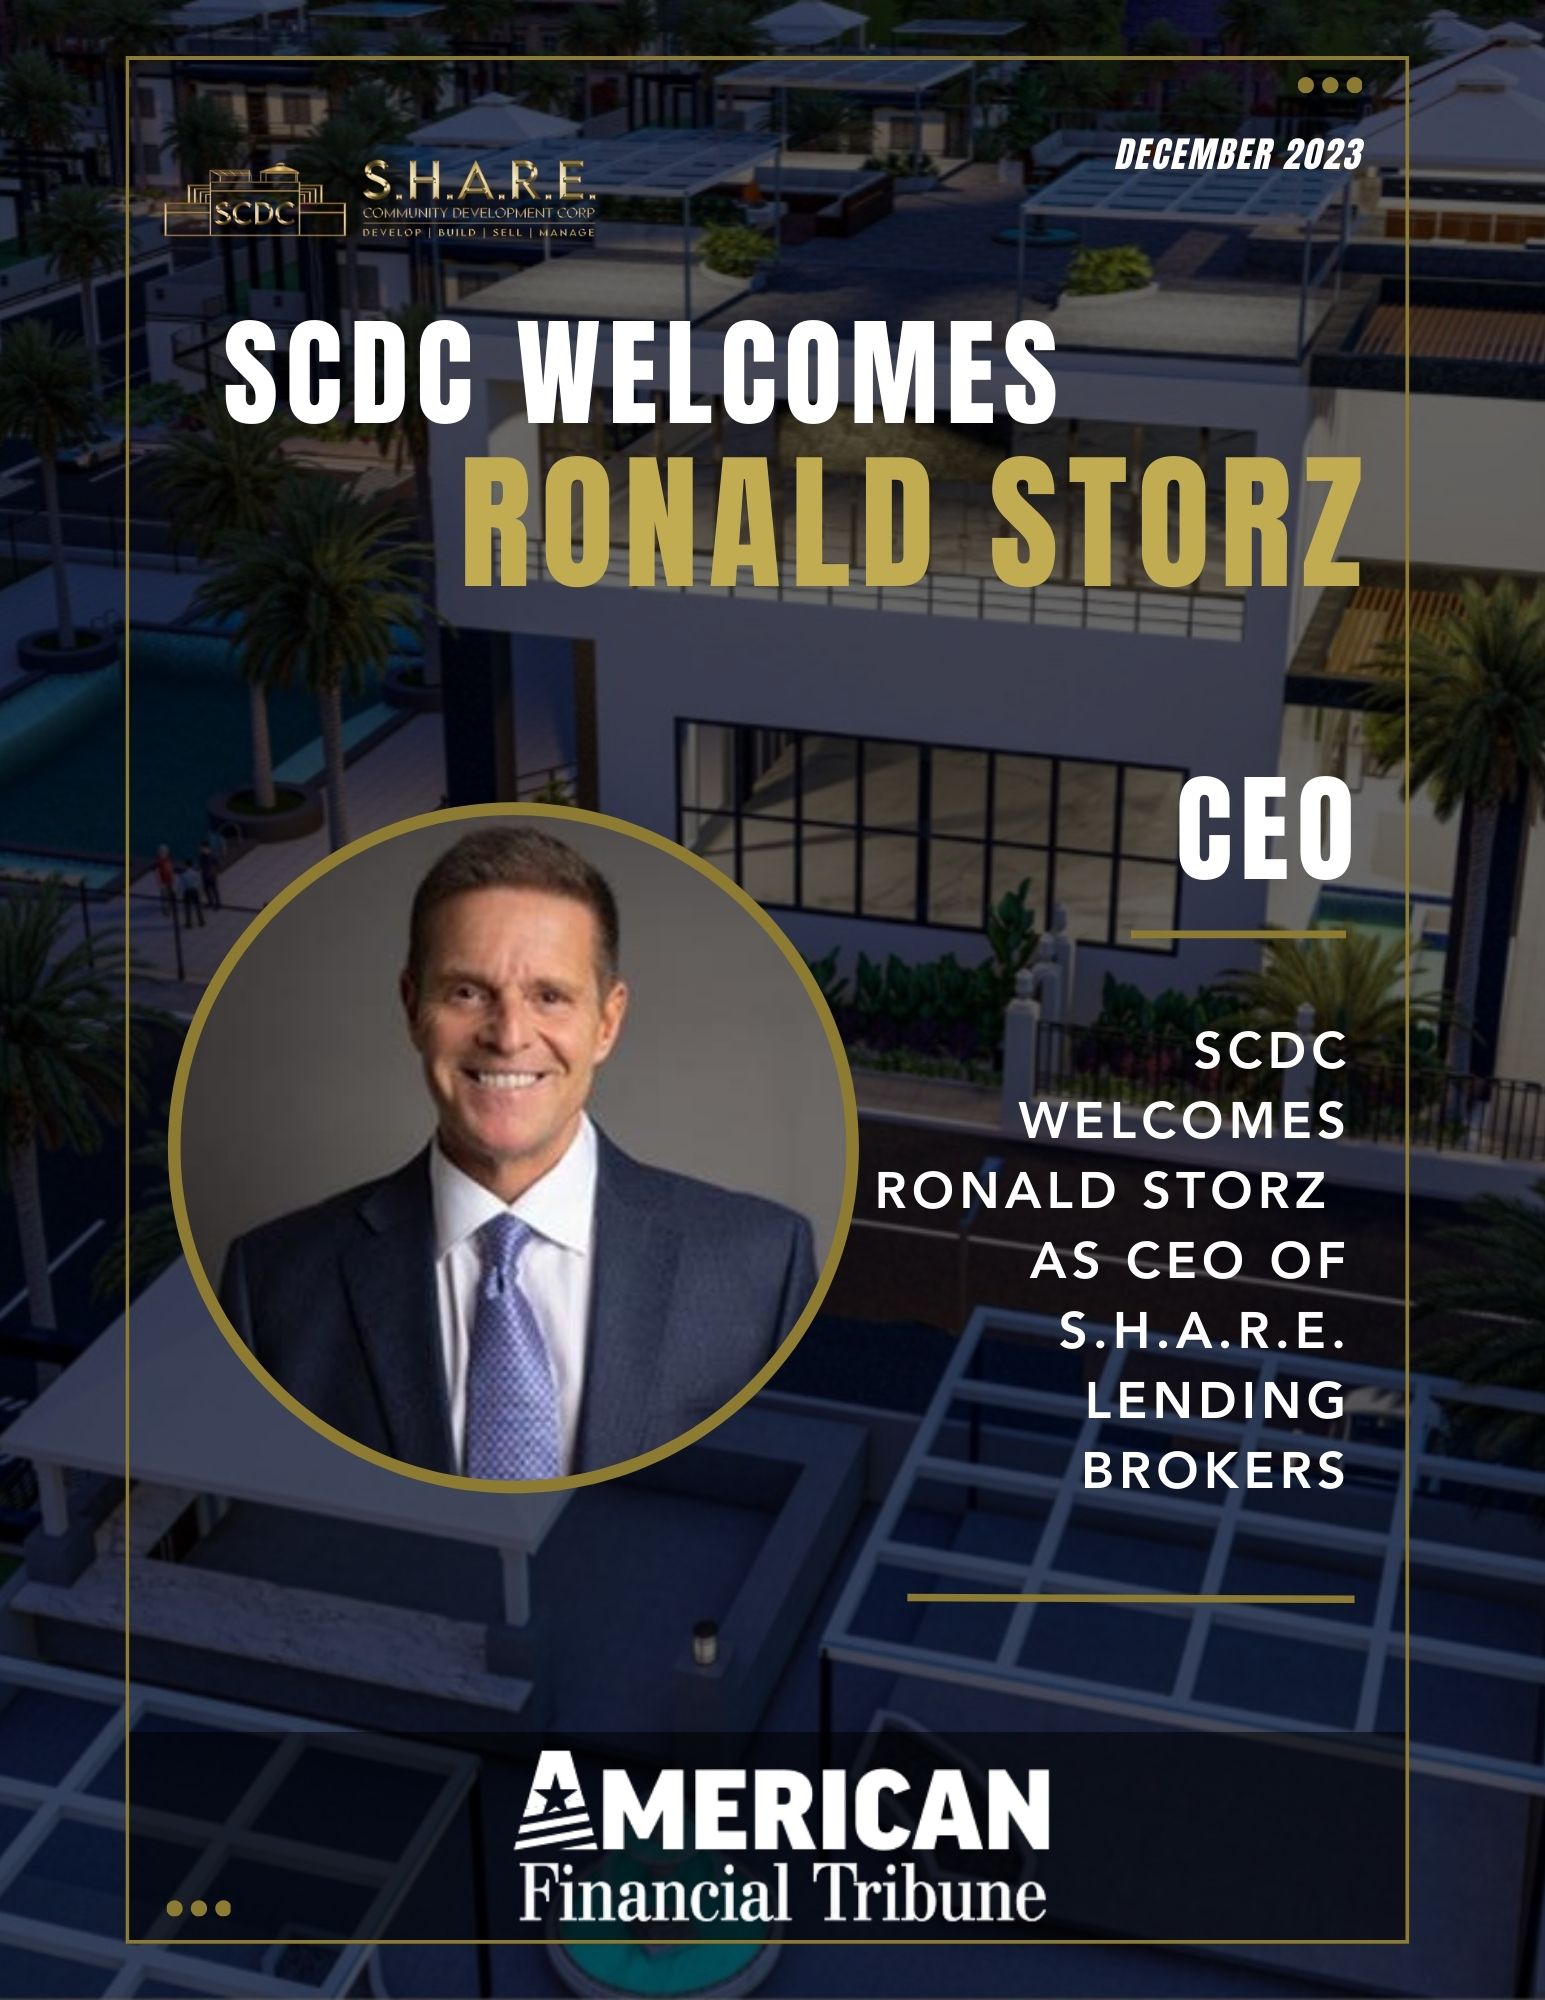 S.H.A.R.E. Lending Brokers, a Subsidiary of SCDC, Welcomes Ronald Storz as Chief Executive Officer